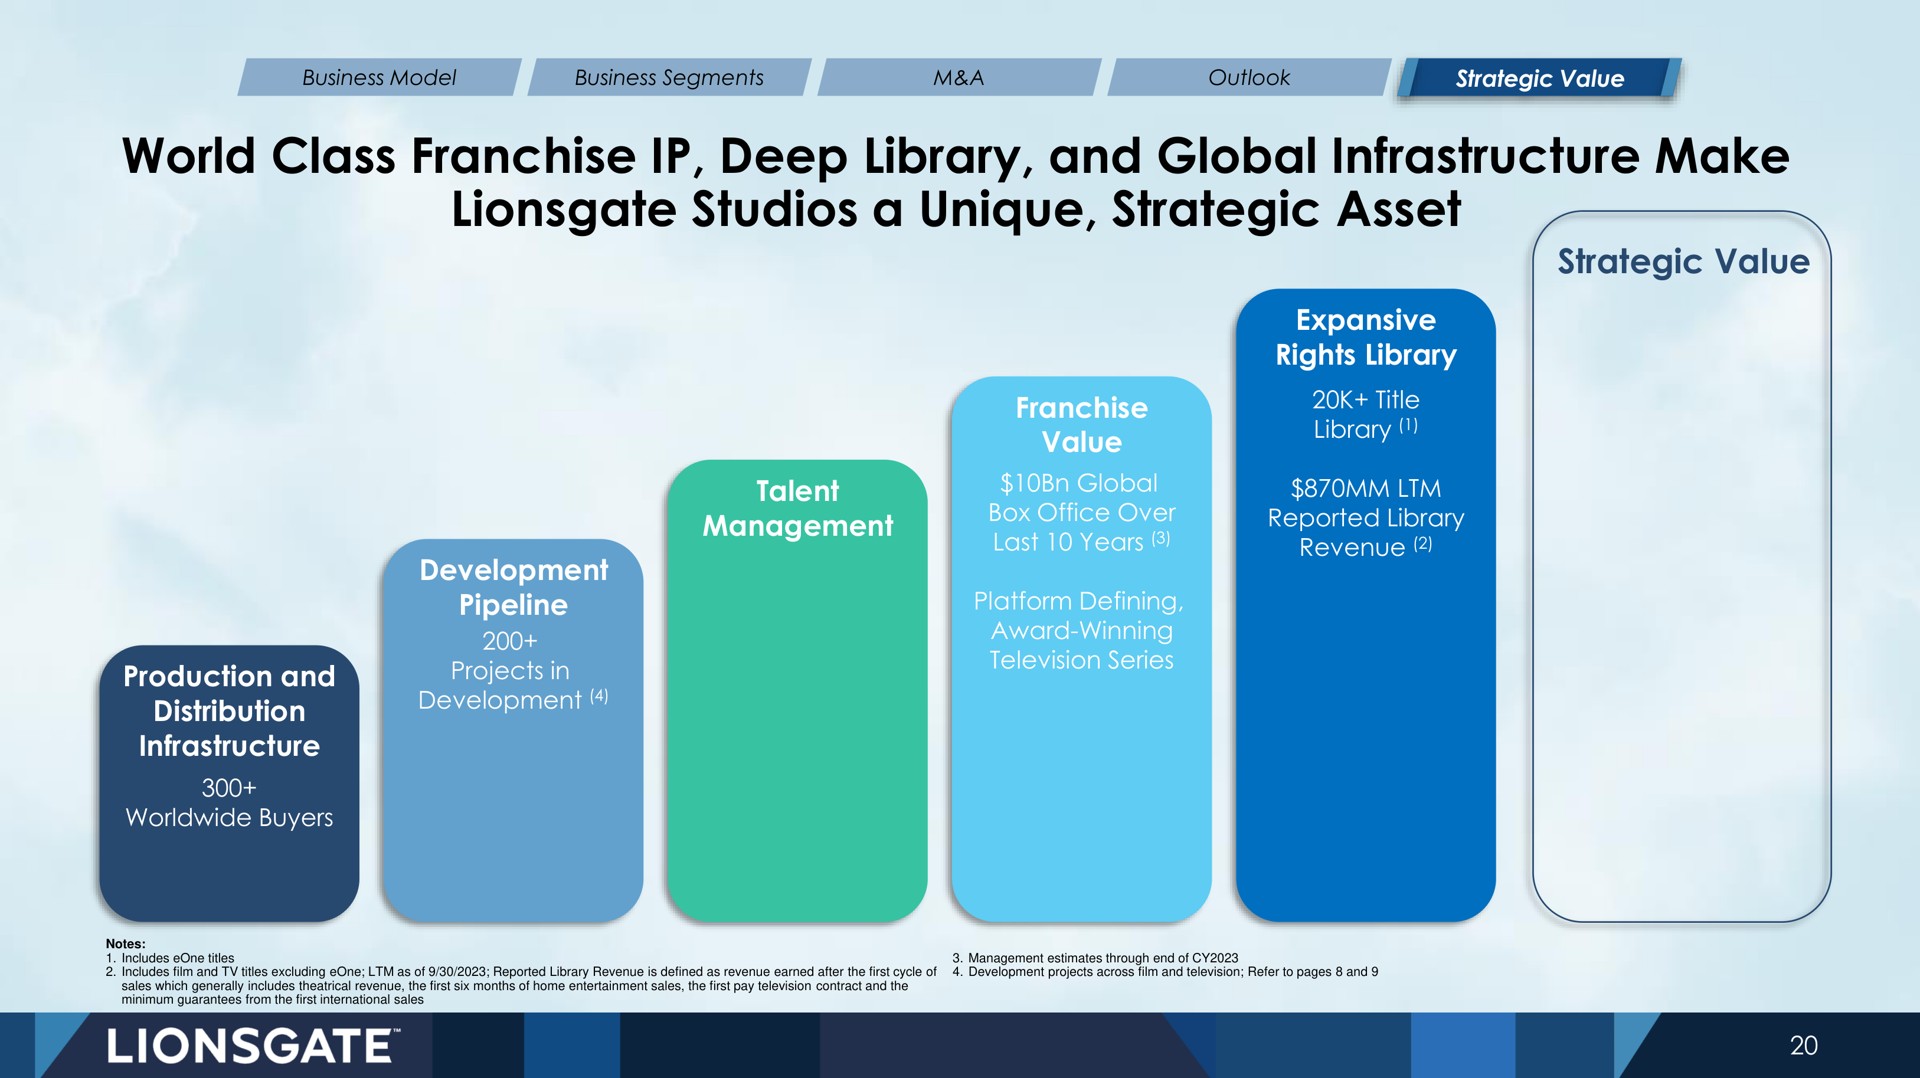 world class franchise deep library and global infrastructure make studios a unique strategic asset | Lionsgate